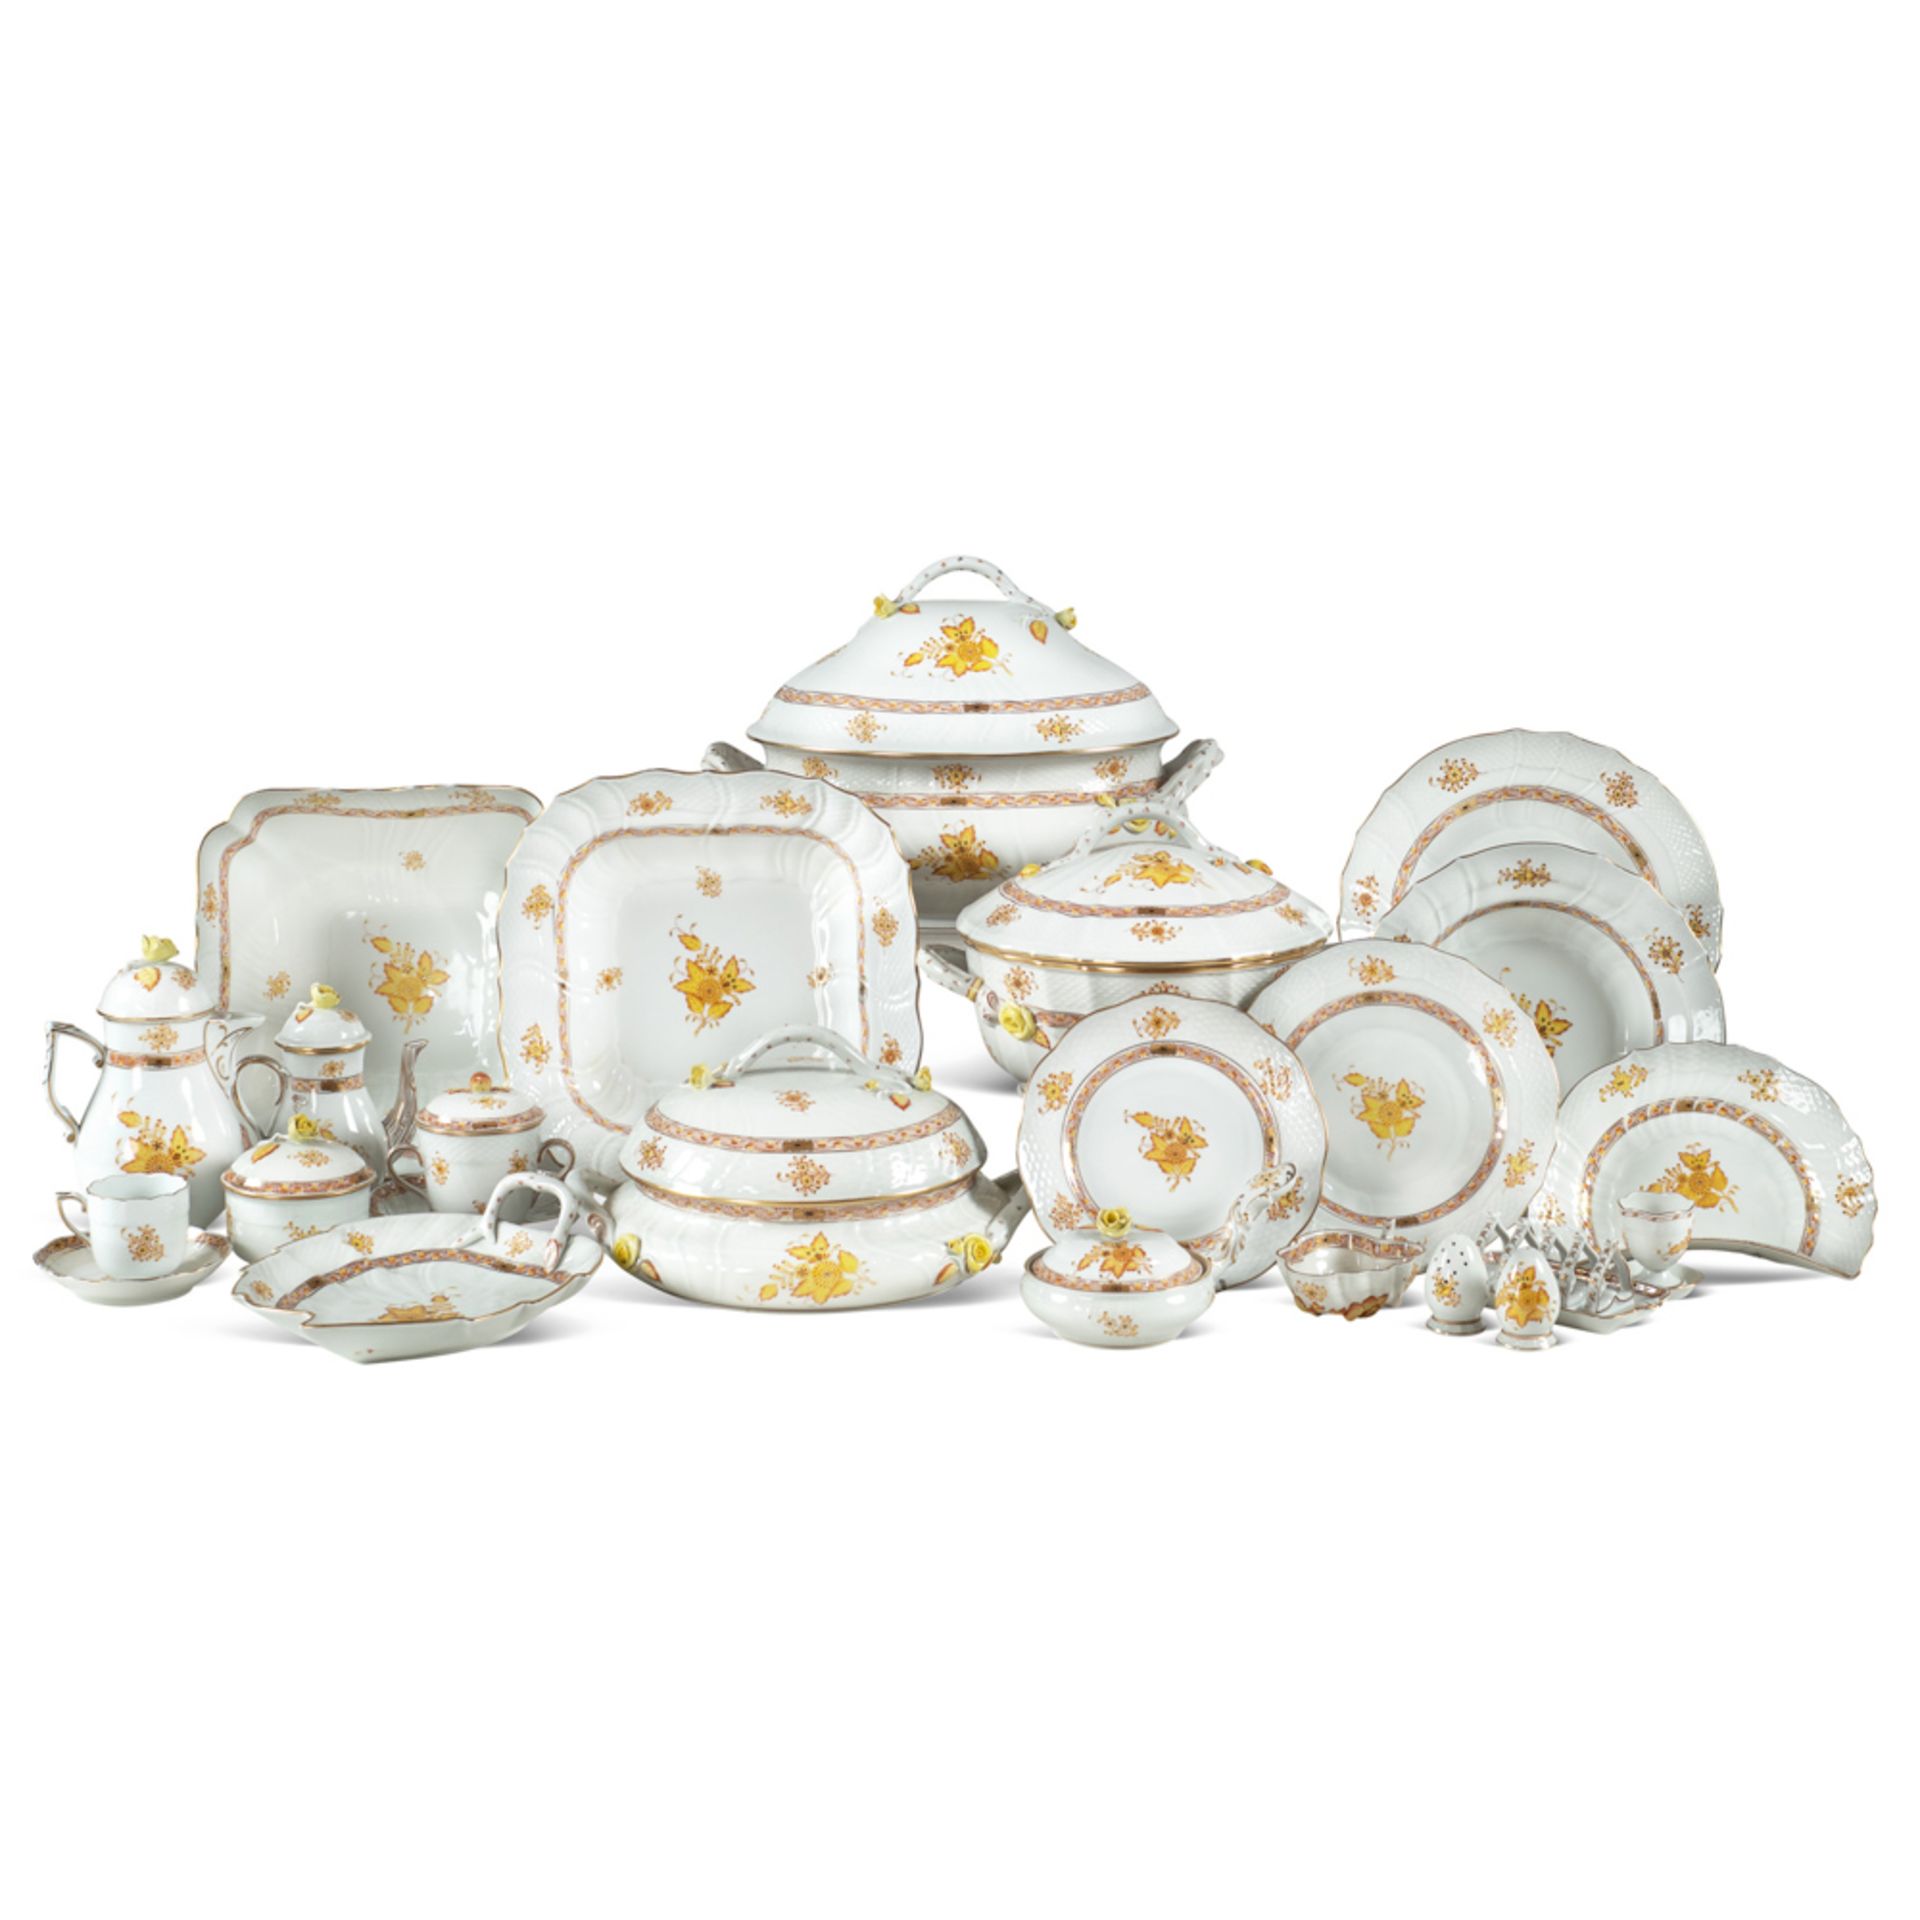 Herend porcelain table set (162) for Candida Tupini, Rome, mid 20th century Apponyi yellow